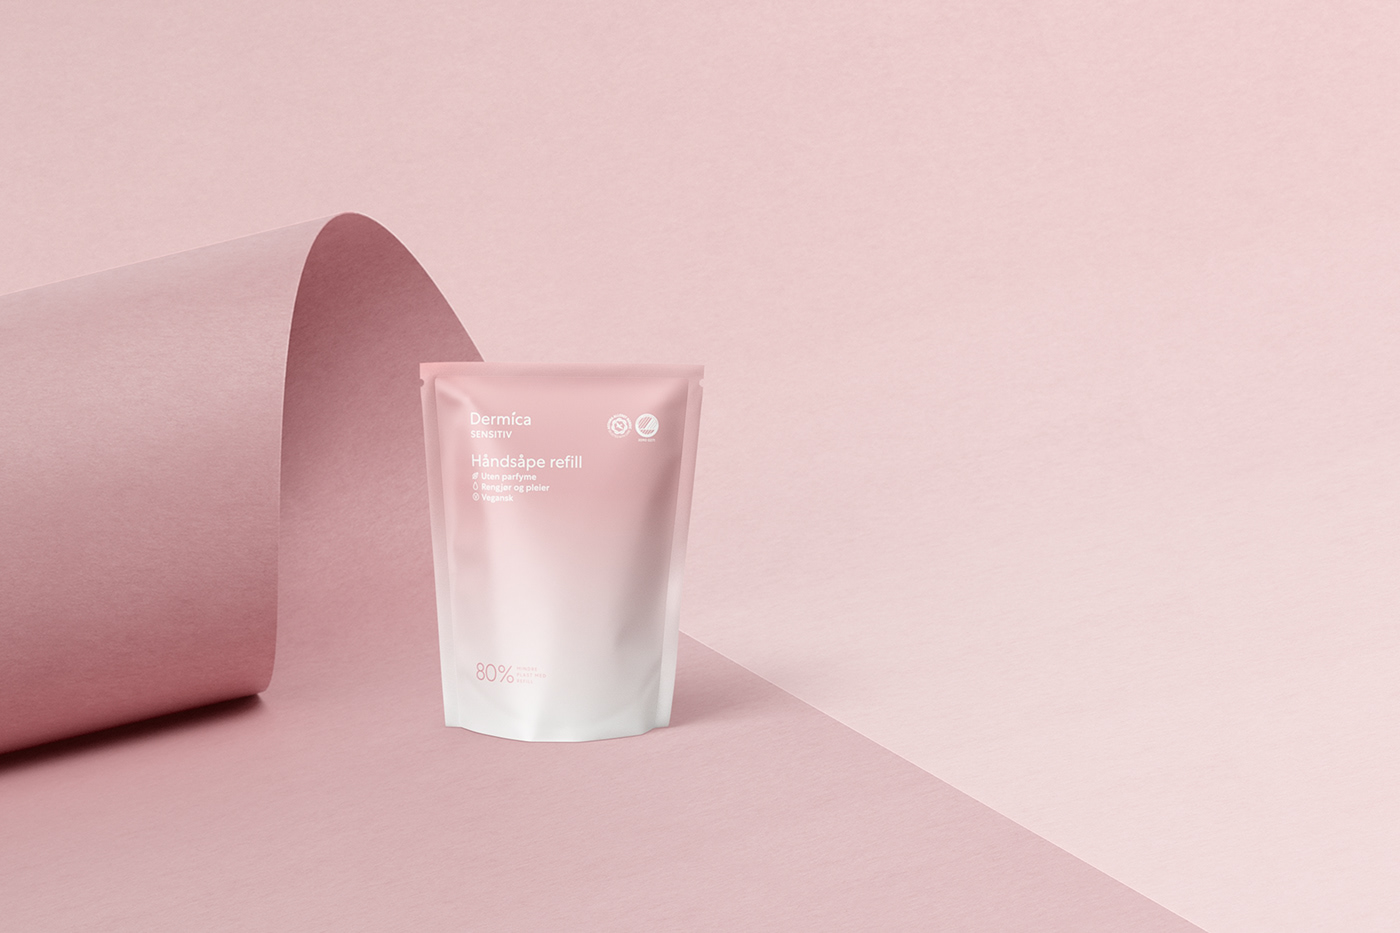 beauty biobased brand Packaging recycling skin Sustainability vegan